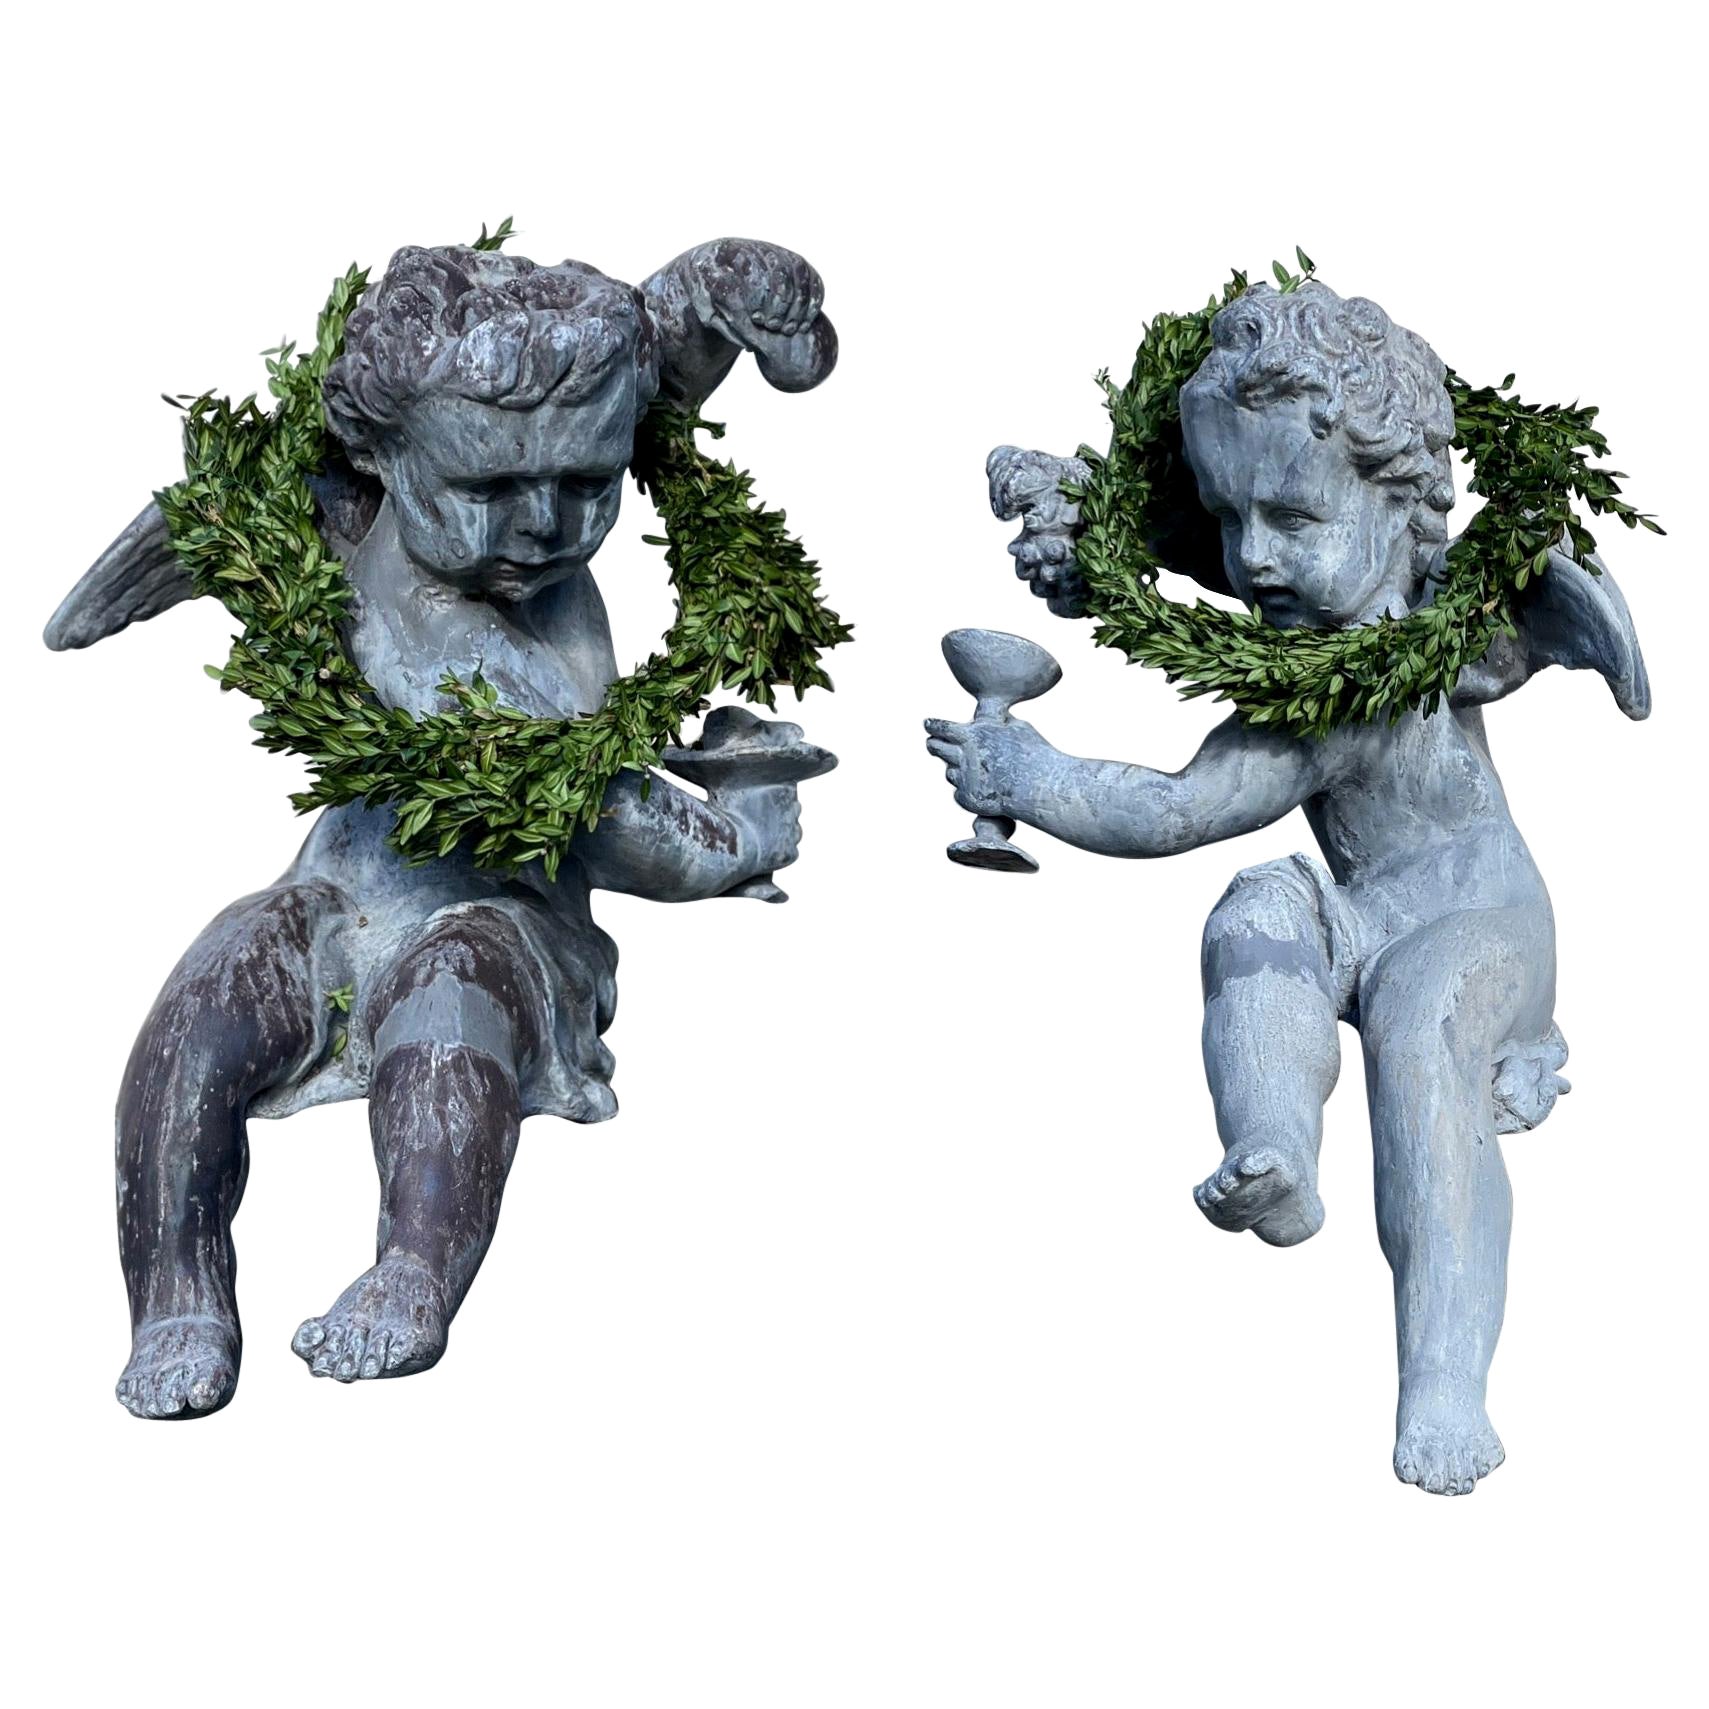 Pair of French Lead Bacchus Putti Seated Garden Figures